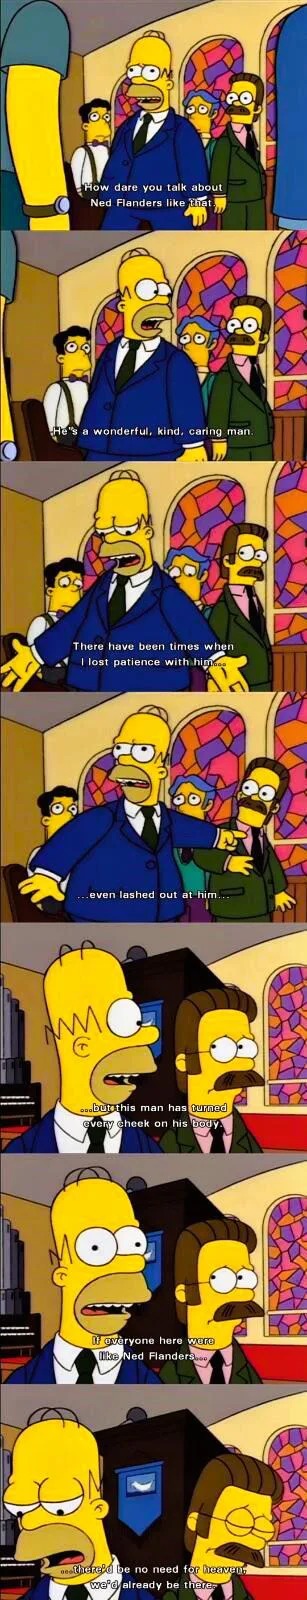 Wholesome words Homer - meme